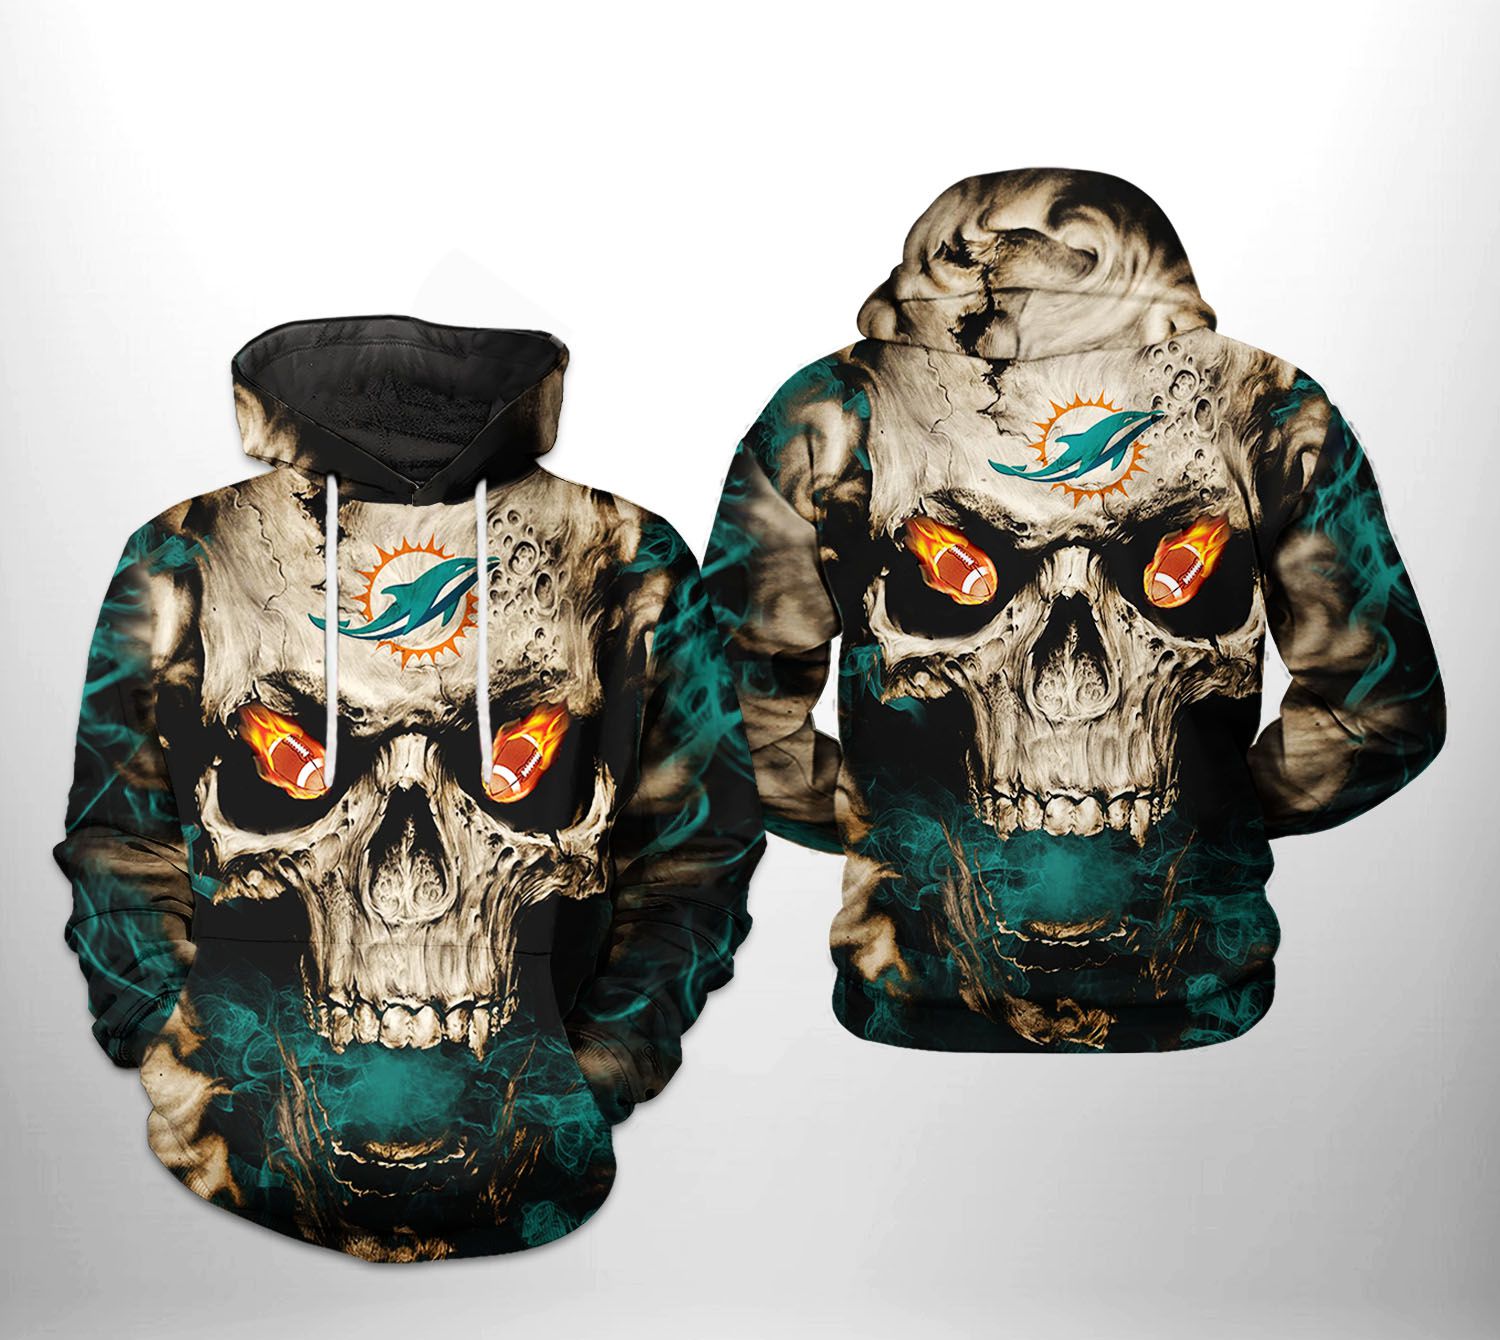 Miami Dolphins Shop - Miami Dolphins NFL Skull Team 3D Printed HoodieZipper Hoodie